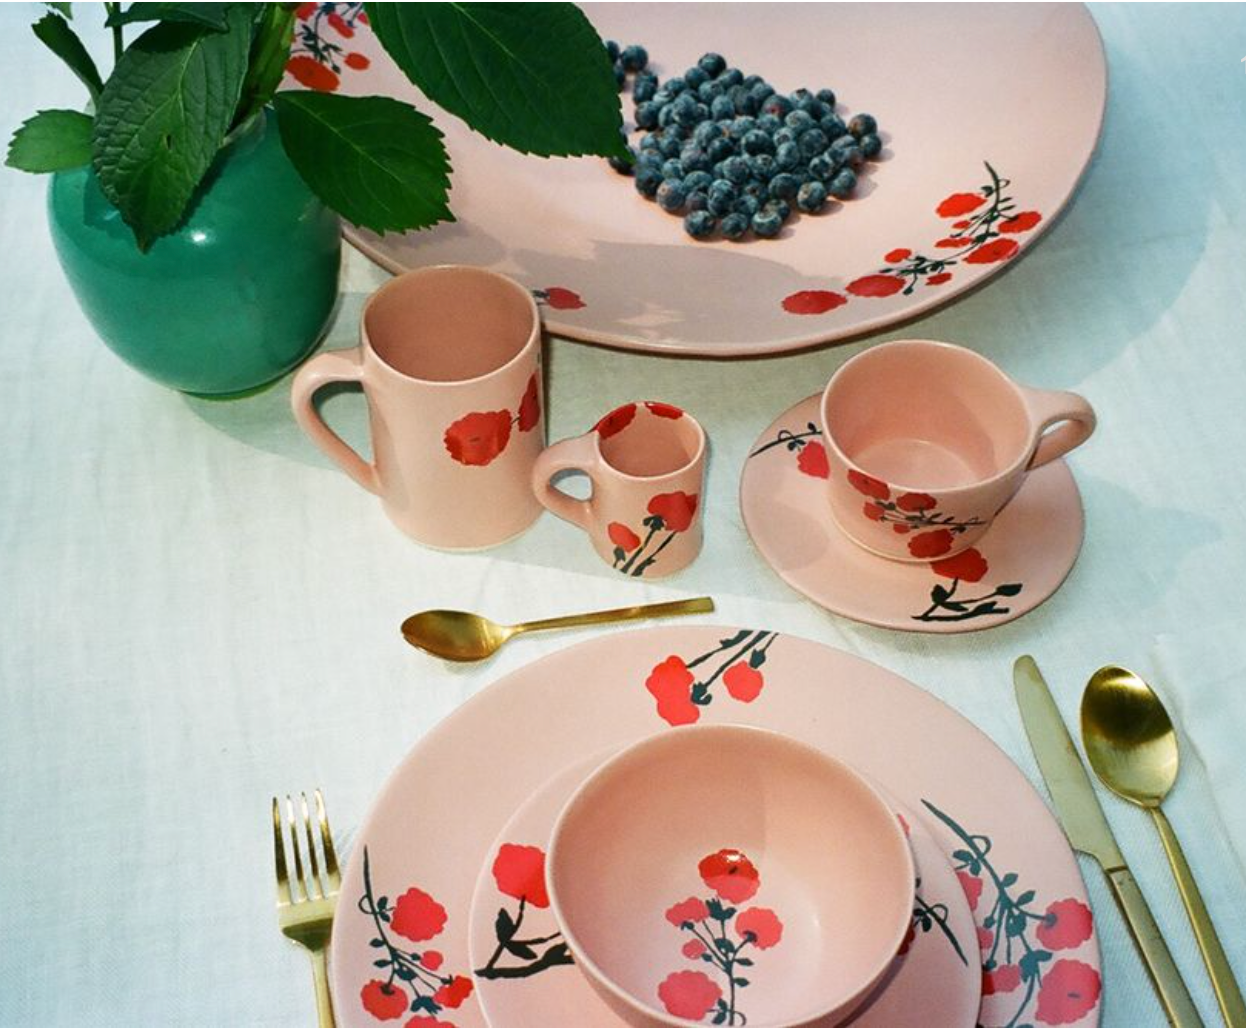 ANTWERP-BASED LABEL BERNADETTE LAUNCHES NEW HAND-PAINTED FLORAL CERAMICS